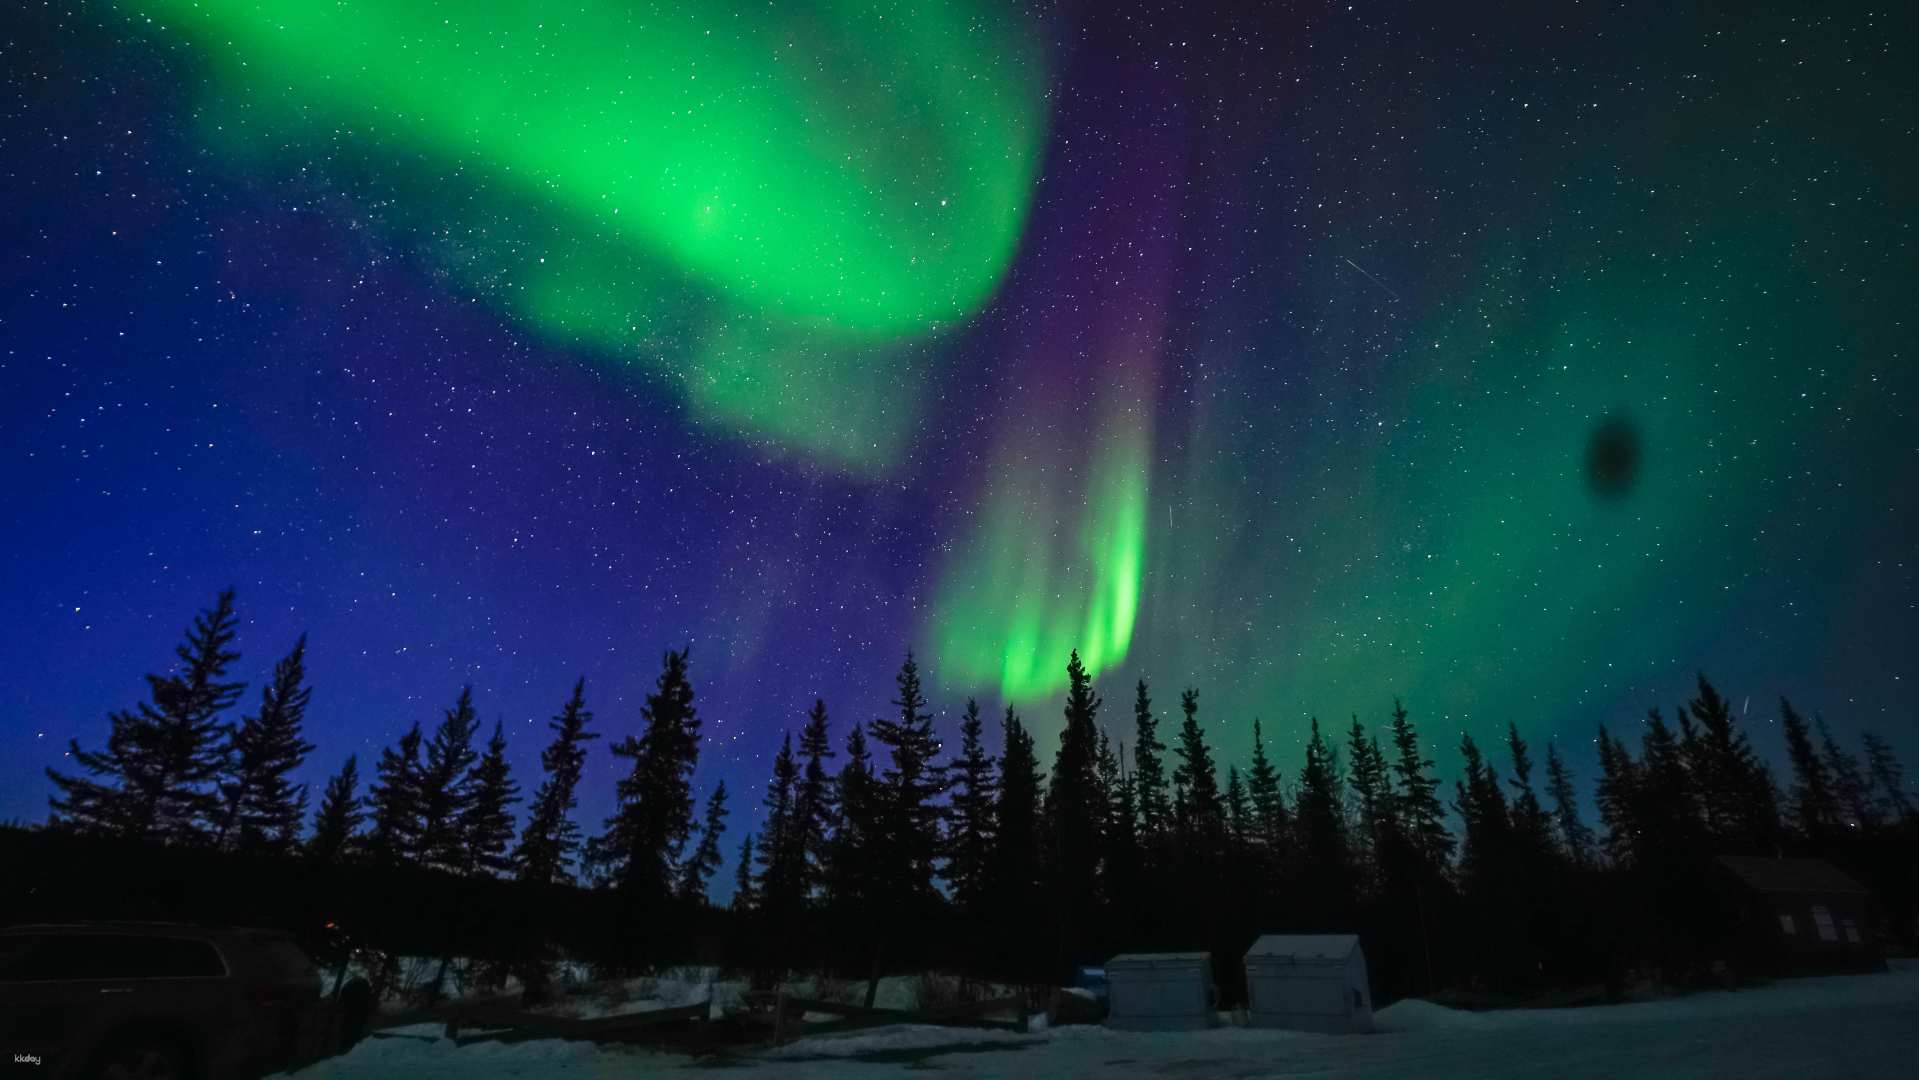 【Early Bird SALE】Yellowknife 4-Day Aurora Tour | Dog Sledding & Waterfall Hikes | with Airport Transfer